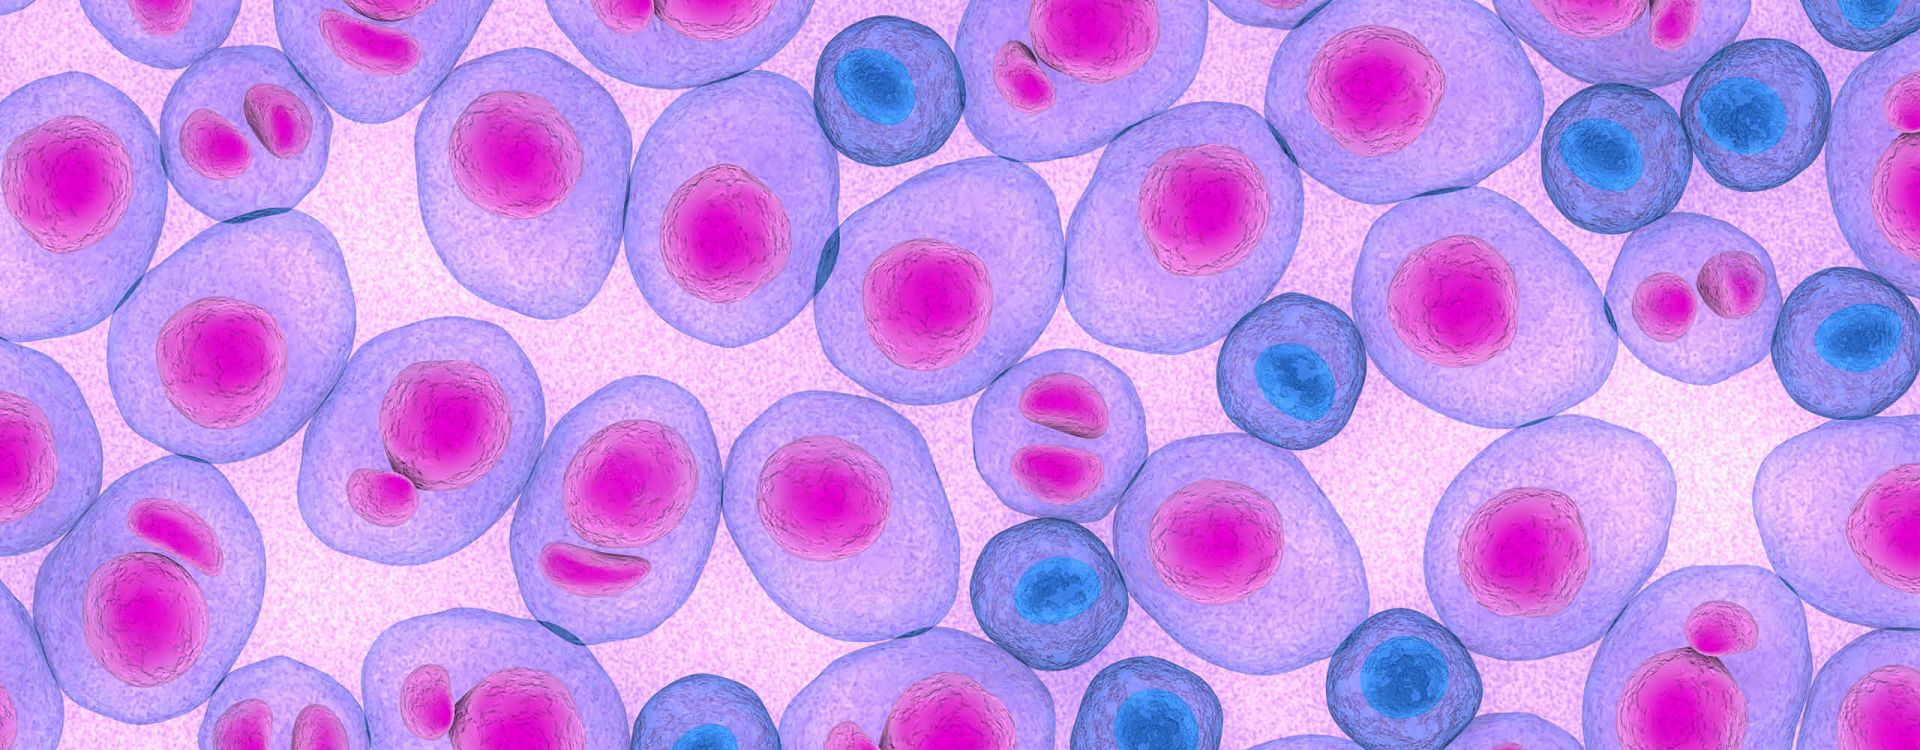 Can Cord Blood Stem Cells Cure Leukemia? Article Image